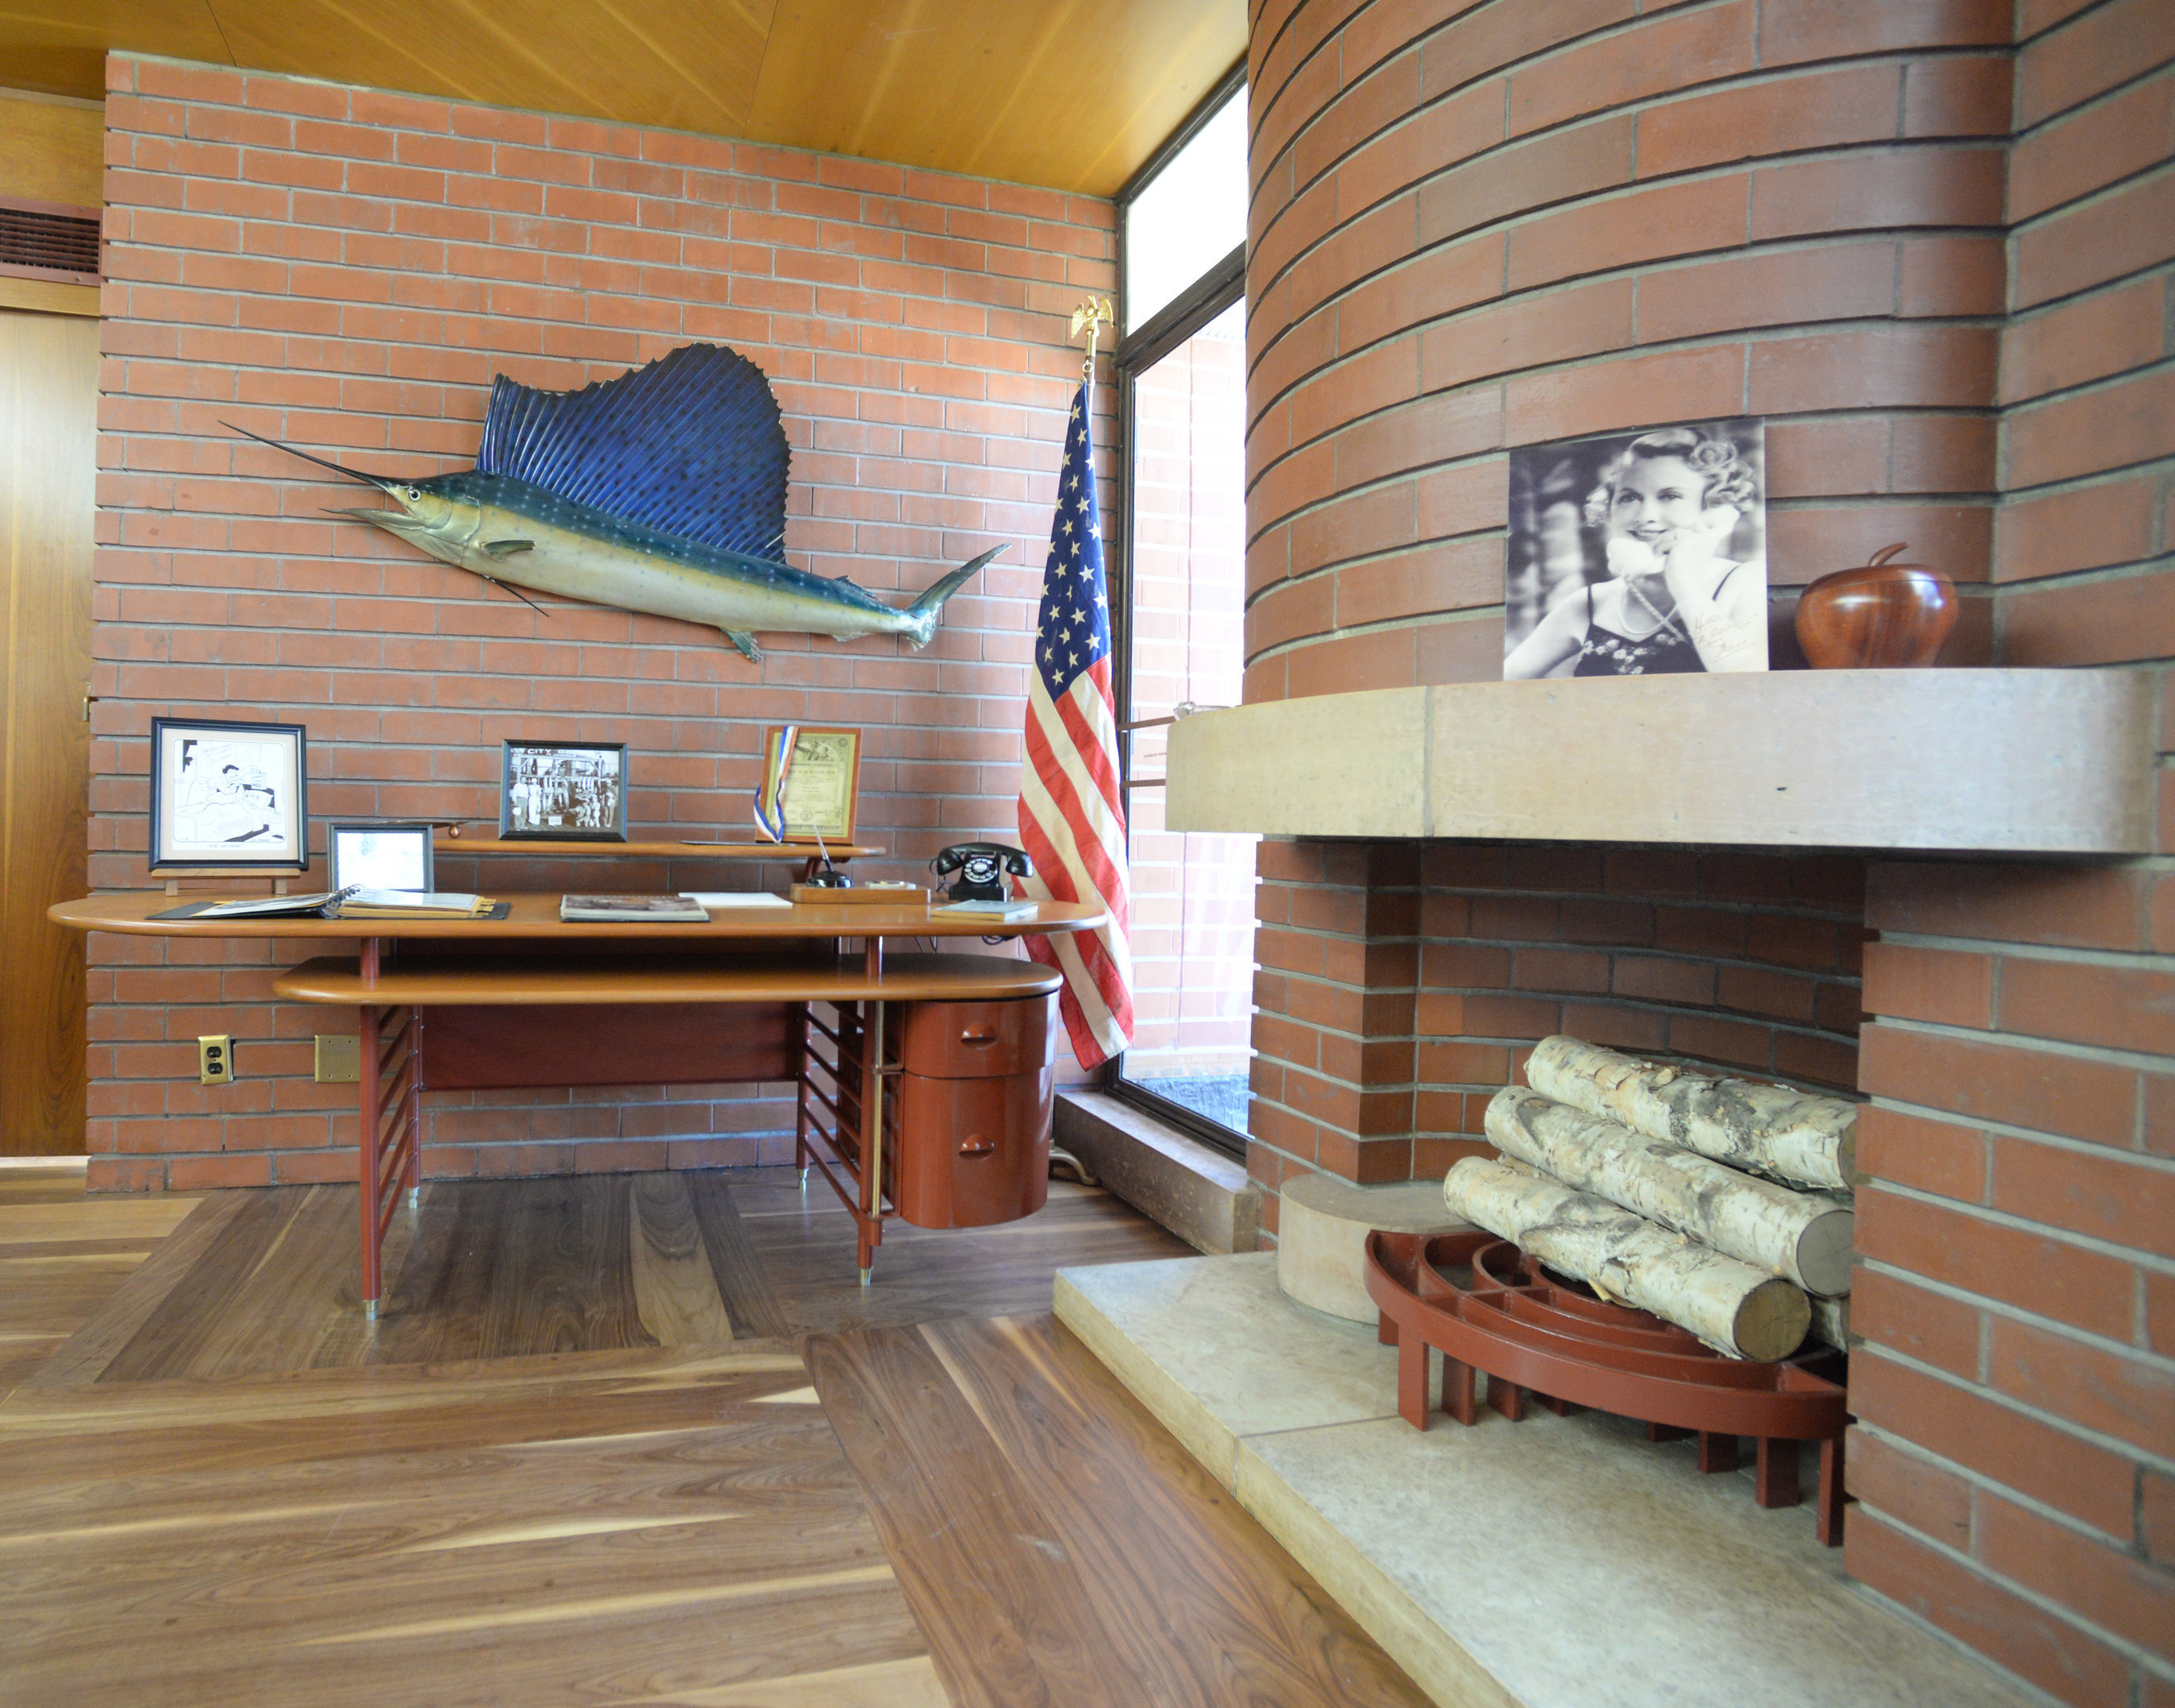 New this year, visitors can explore the refurbished 1940's penthouse office of SC Johnson's third-generation leader H.F. Johnson Jr.